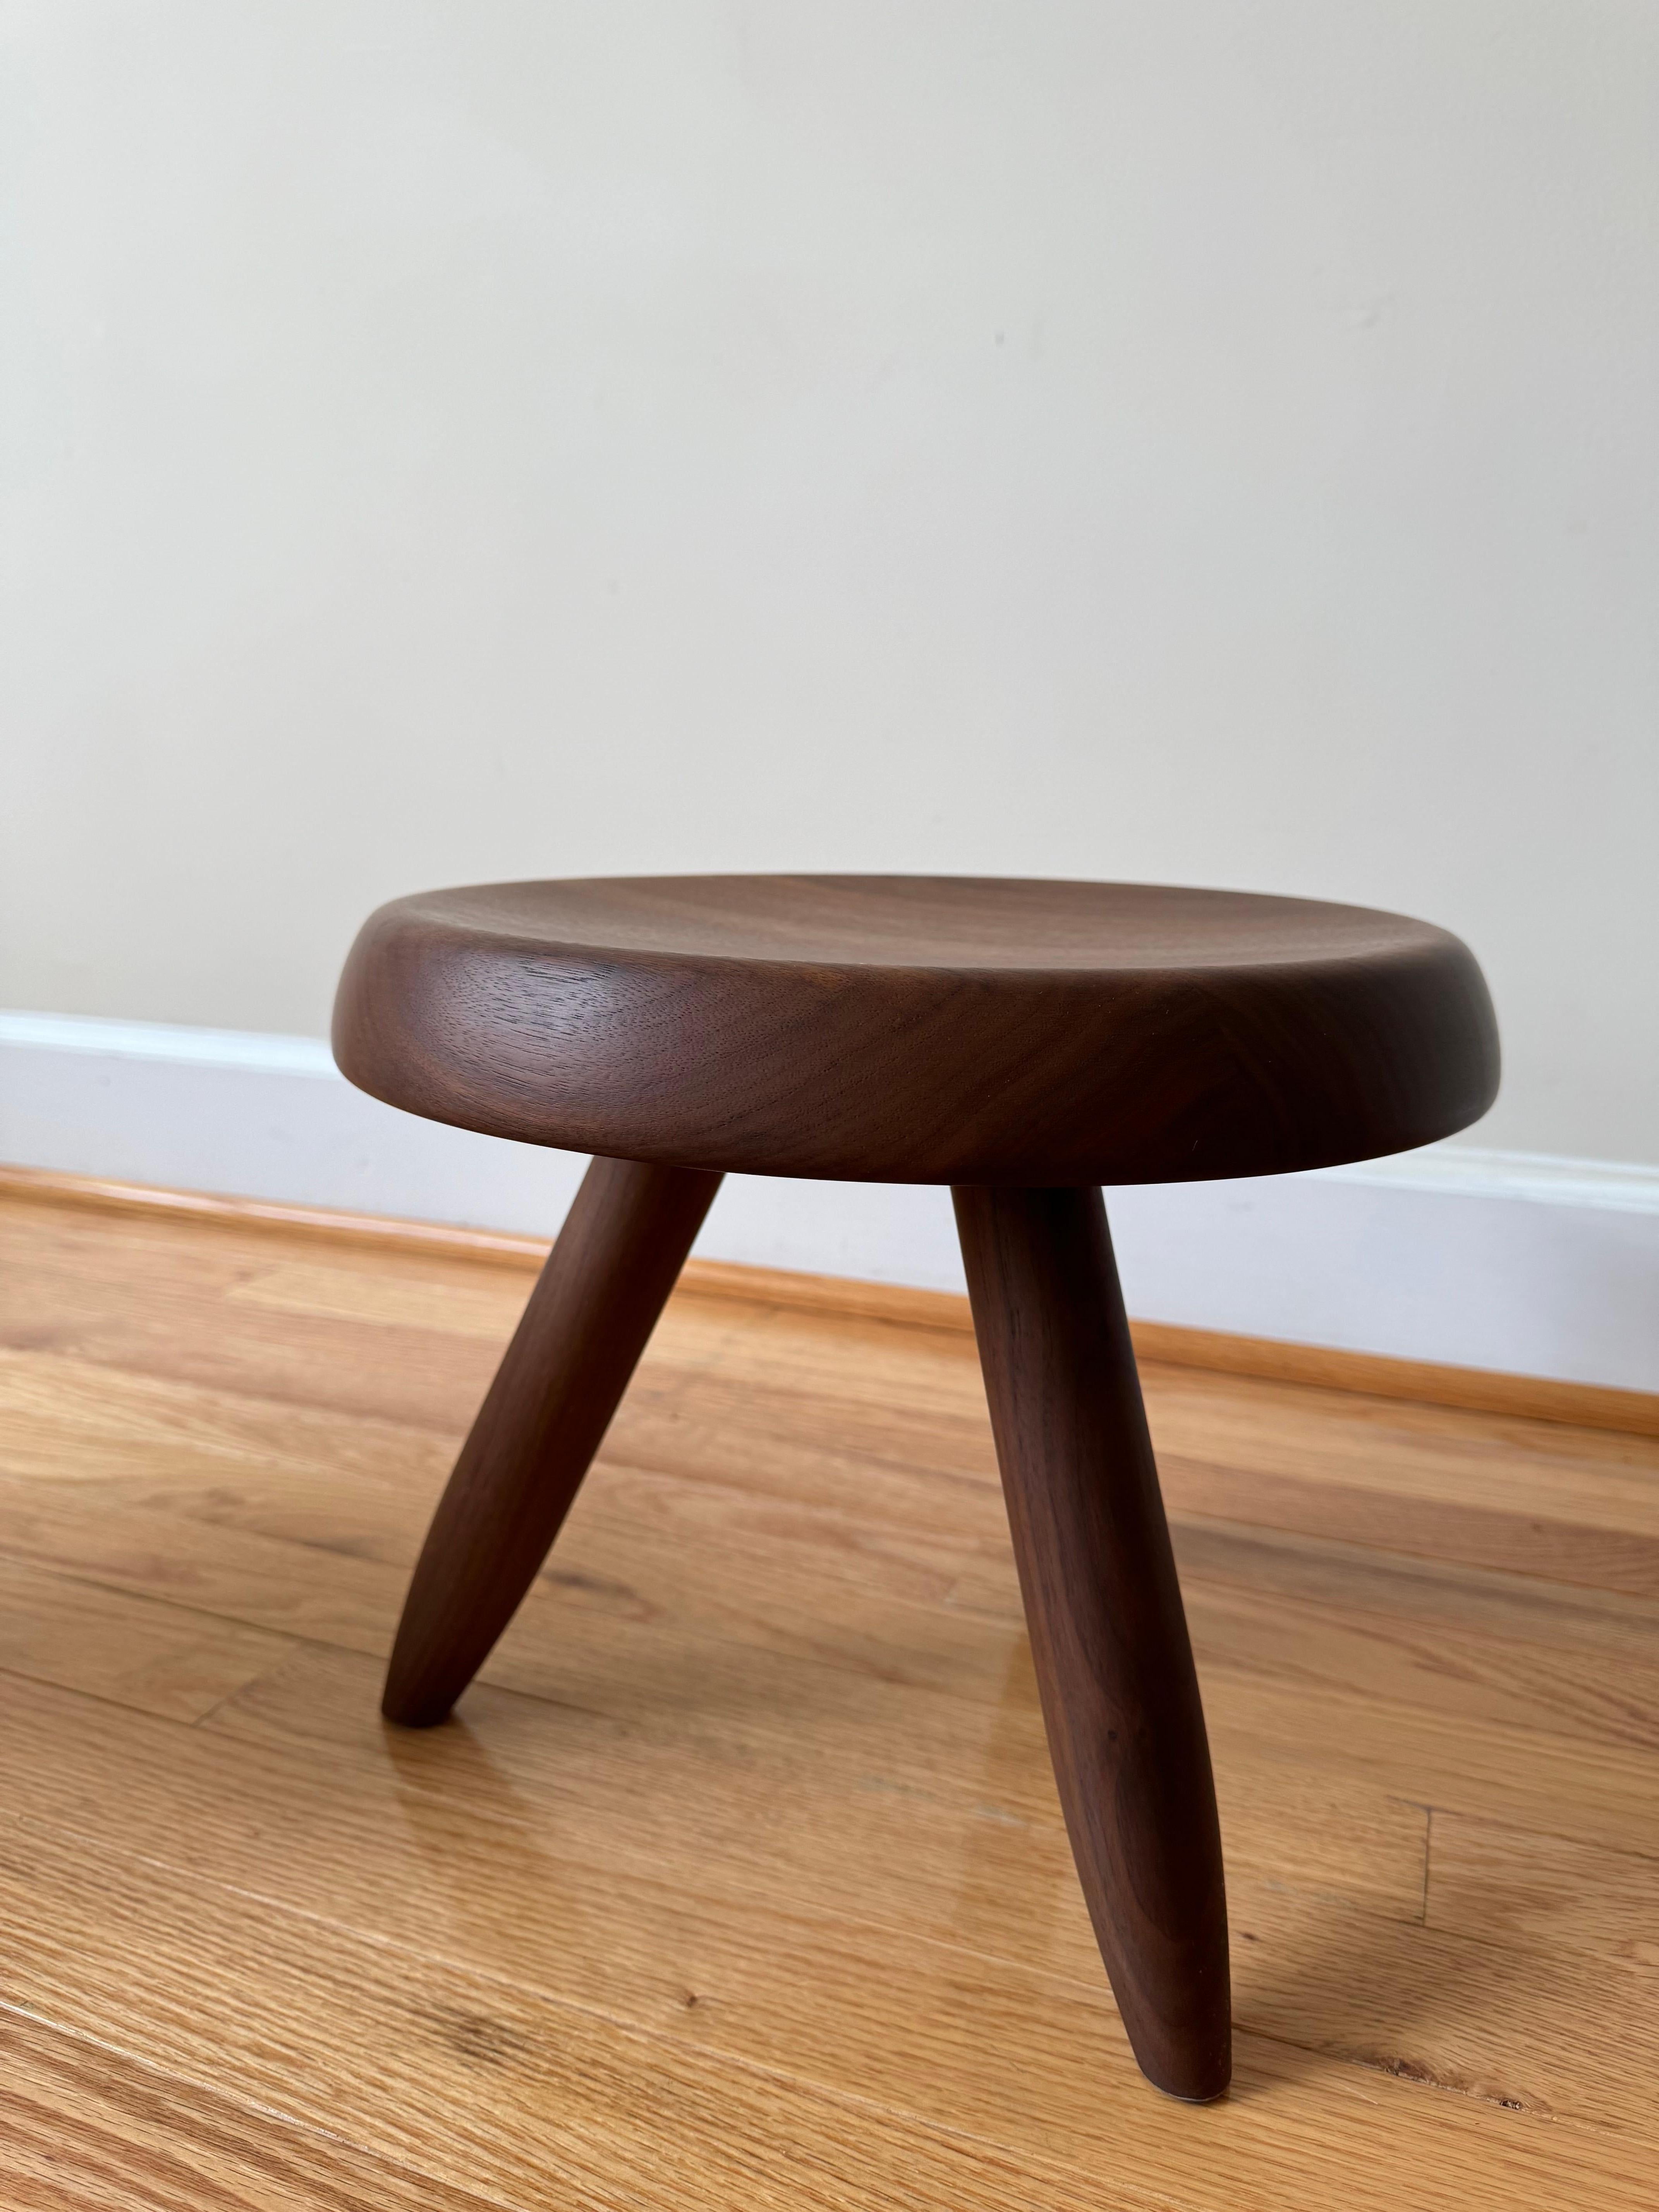 Tabouret Berger (Berger Stool) by Charlotte Perriand for Cassina For Sale 2